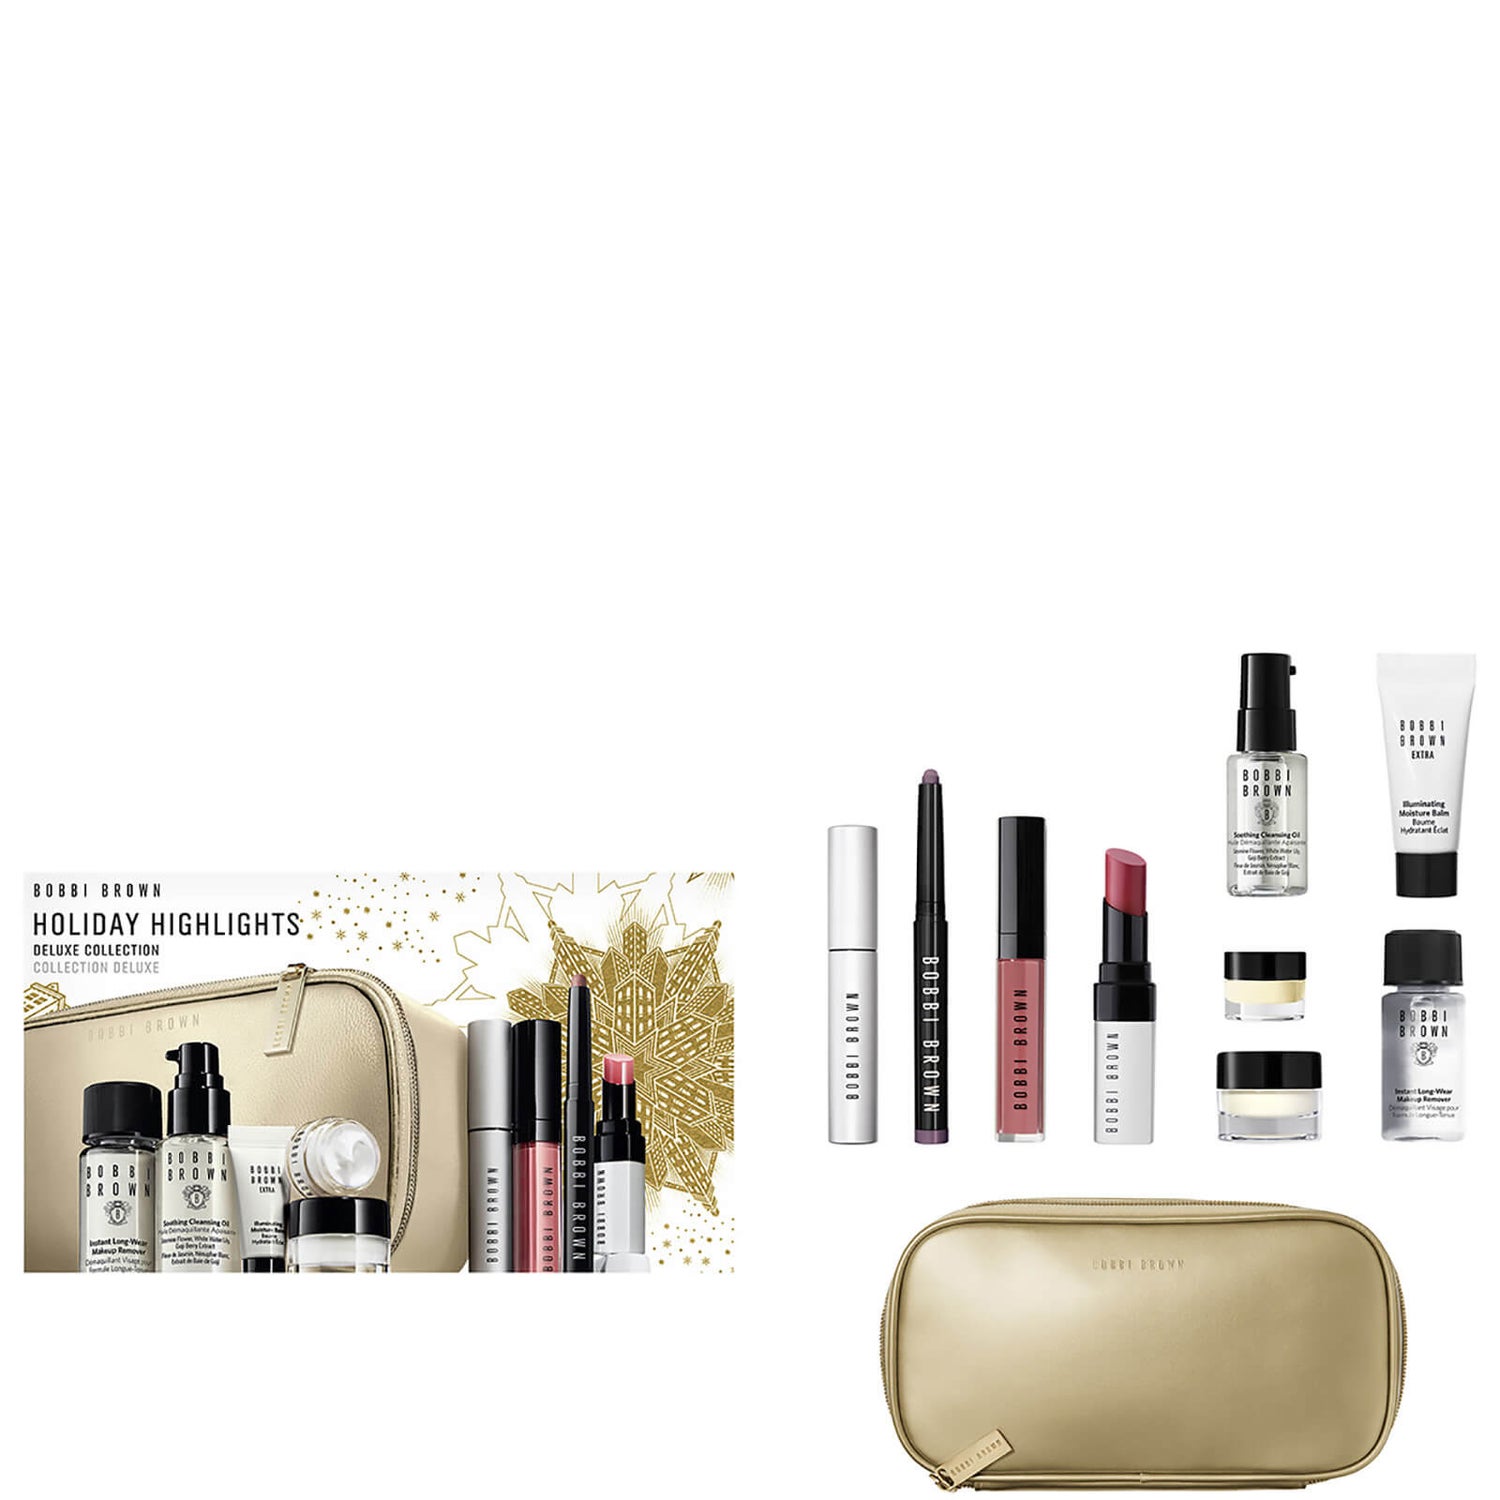 Bobbi Brown Holiday Highlights Deluxe Collection